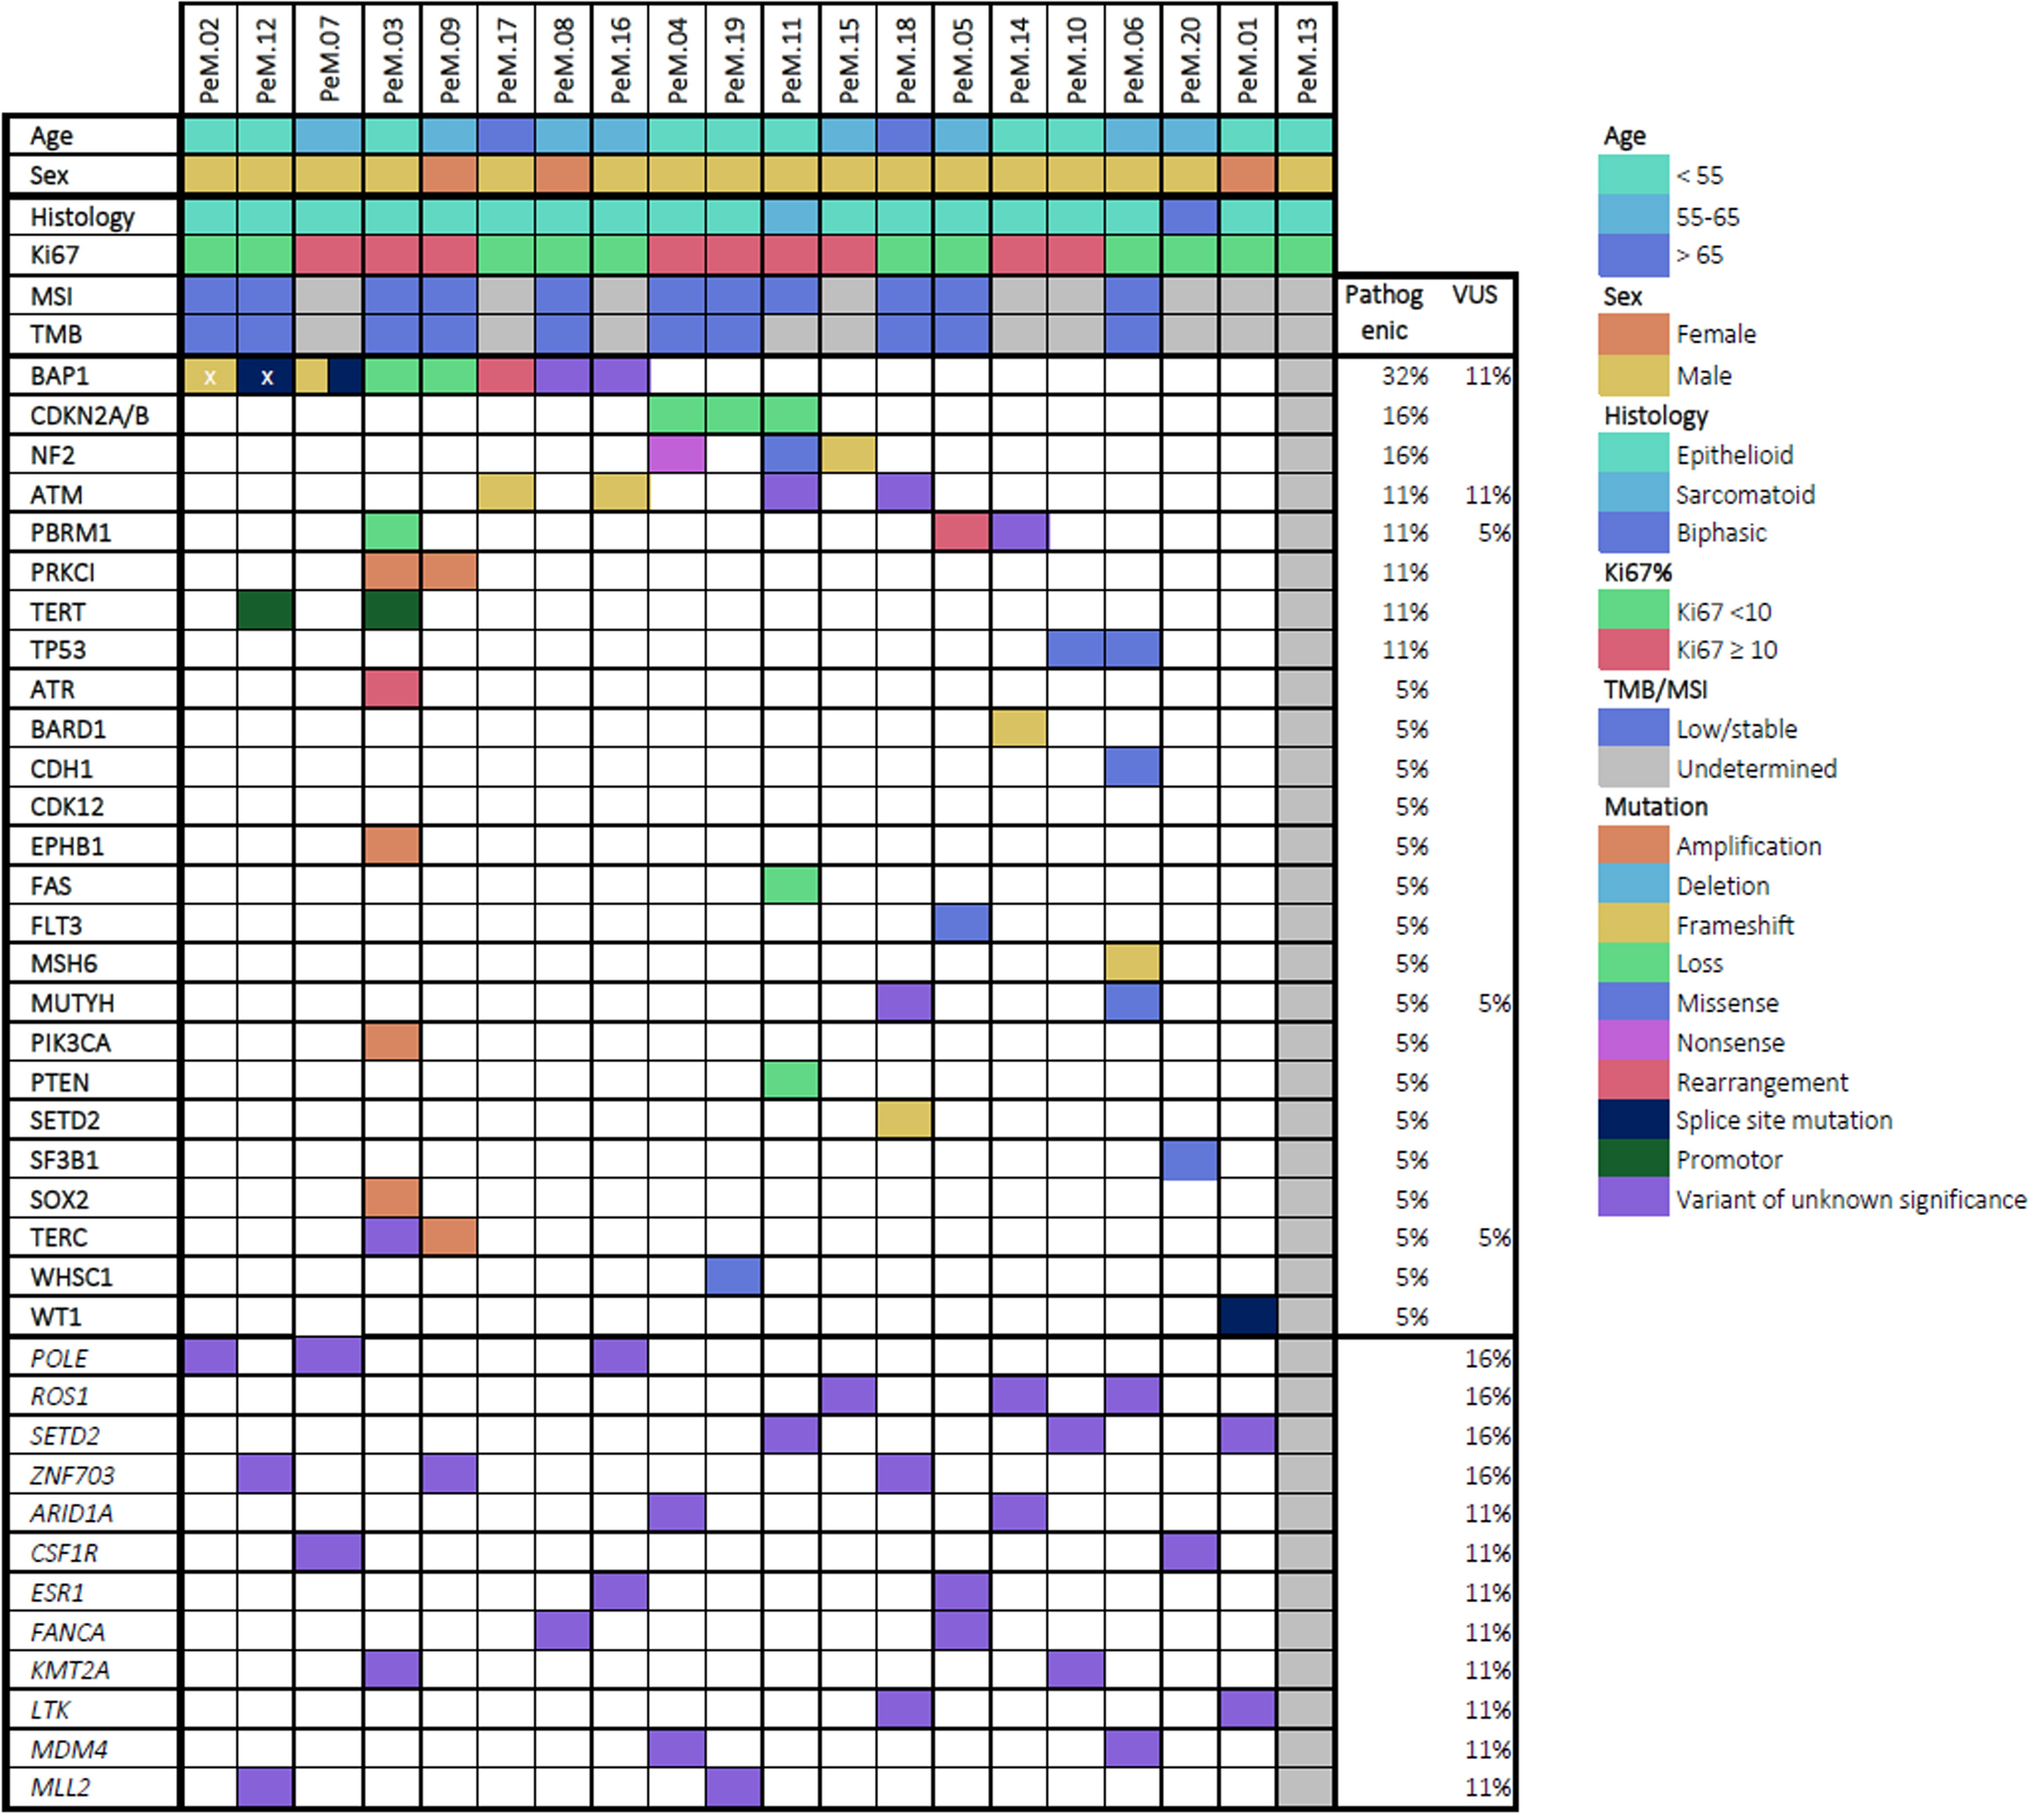 Genomic characterization and detection of potential therapeutic targets for peritoneal mesothelioma in current practice